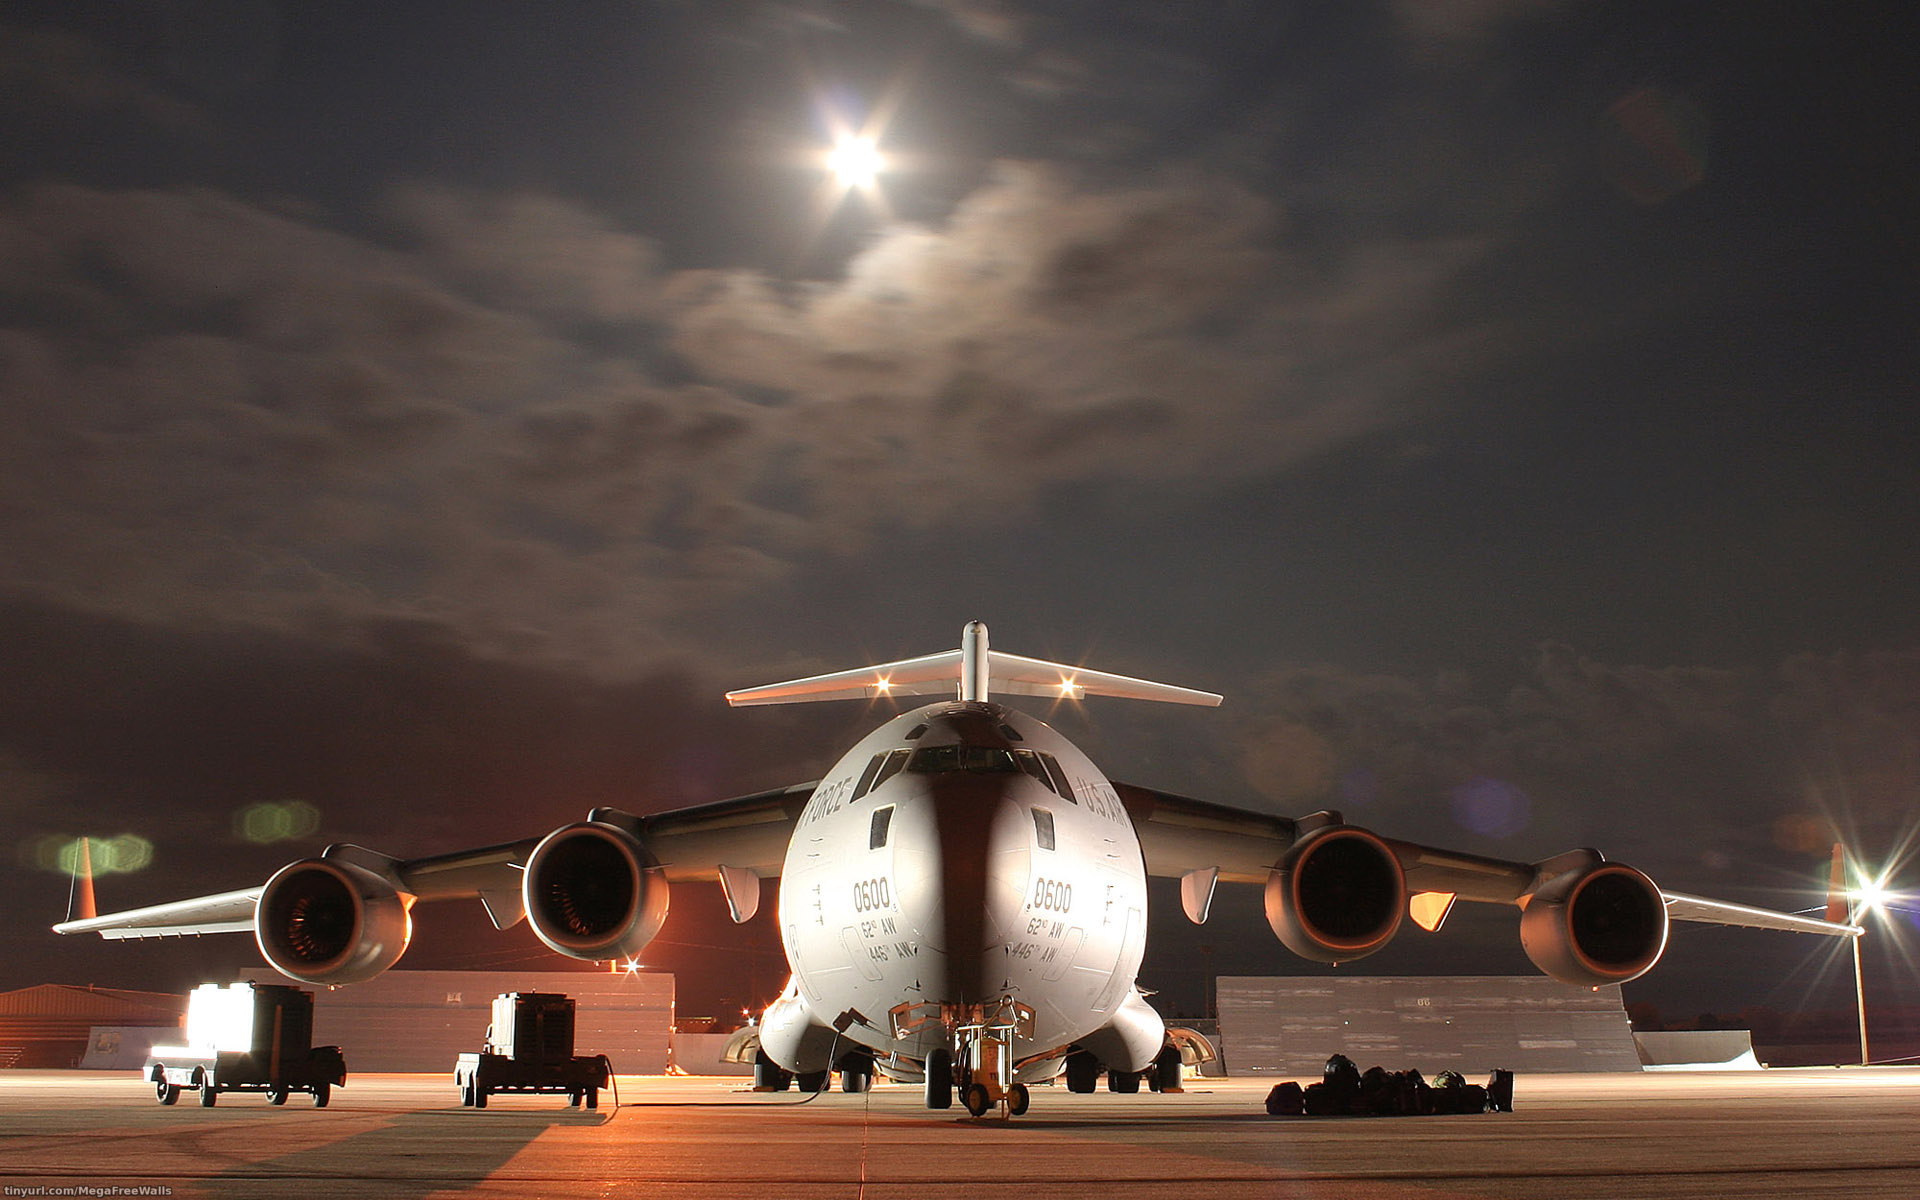 cargo aircraft, cargo plane, boeing, airplane, military, boeing c 17 globemaster iii, air force, aircraft, military transport aircraft